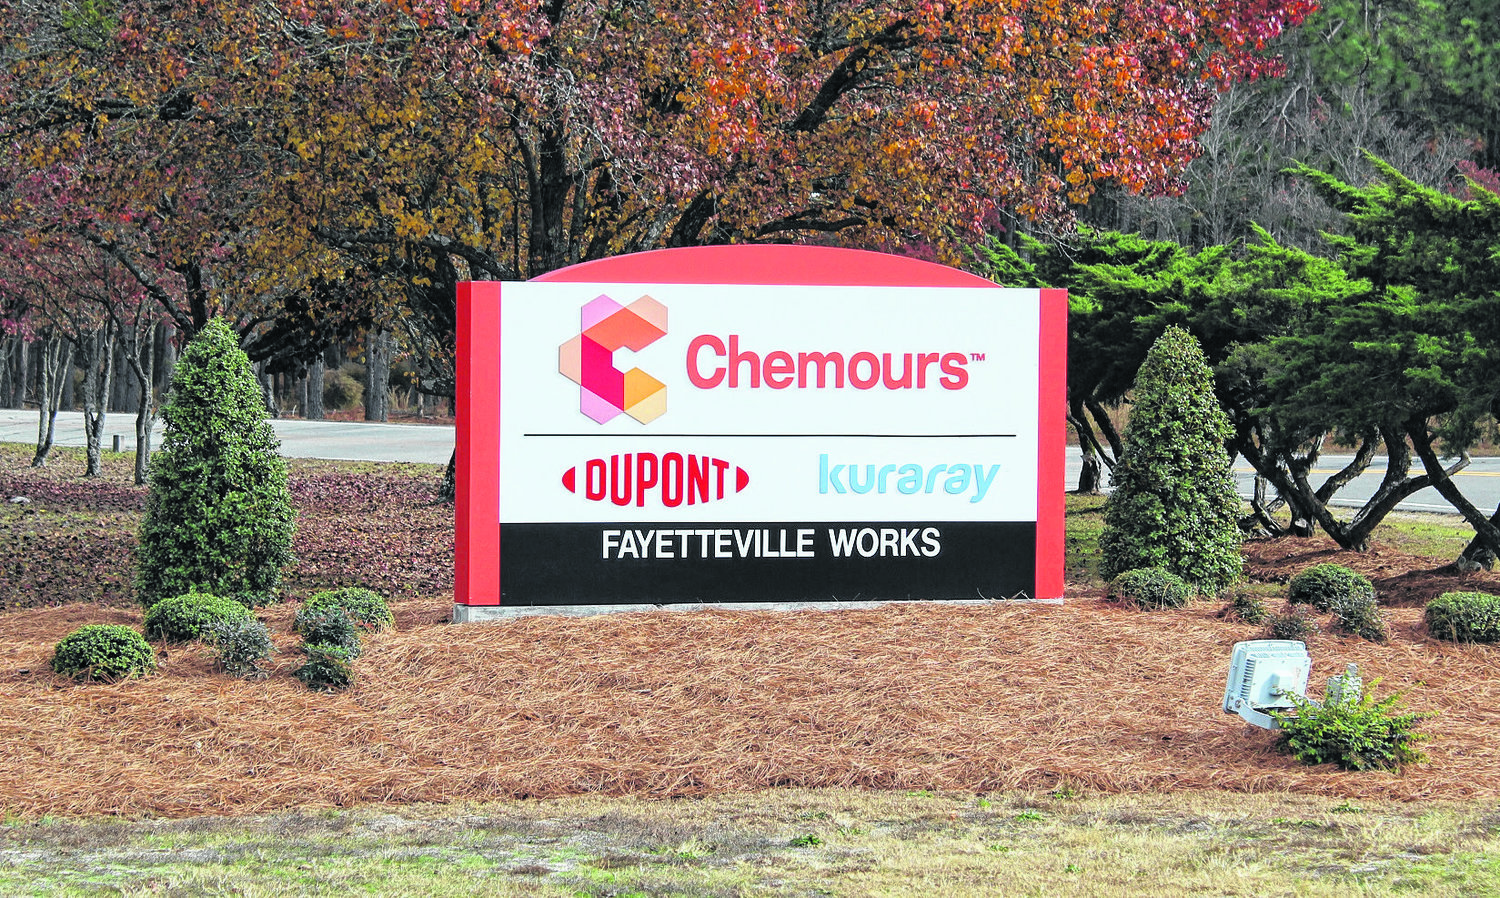 Chemours announced Wednesday that it is challenging the new U.S. Environmental Protection Agency health advisory for GenX.